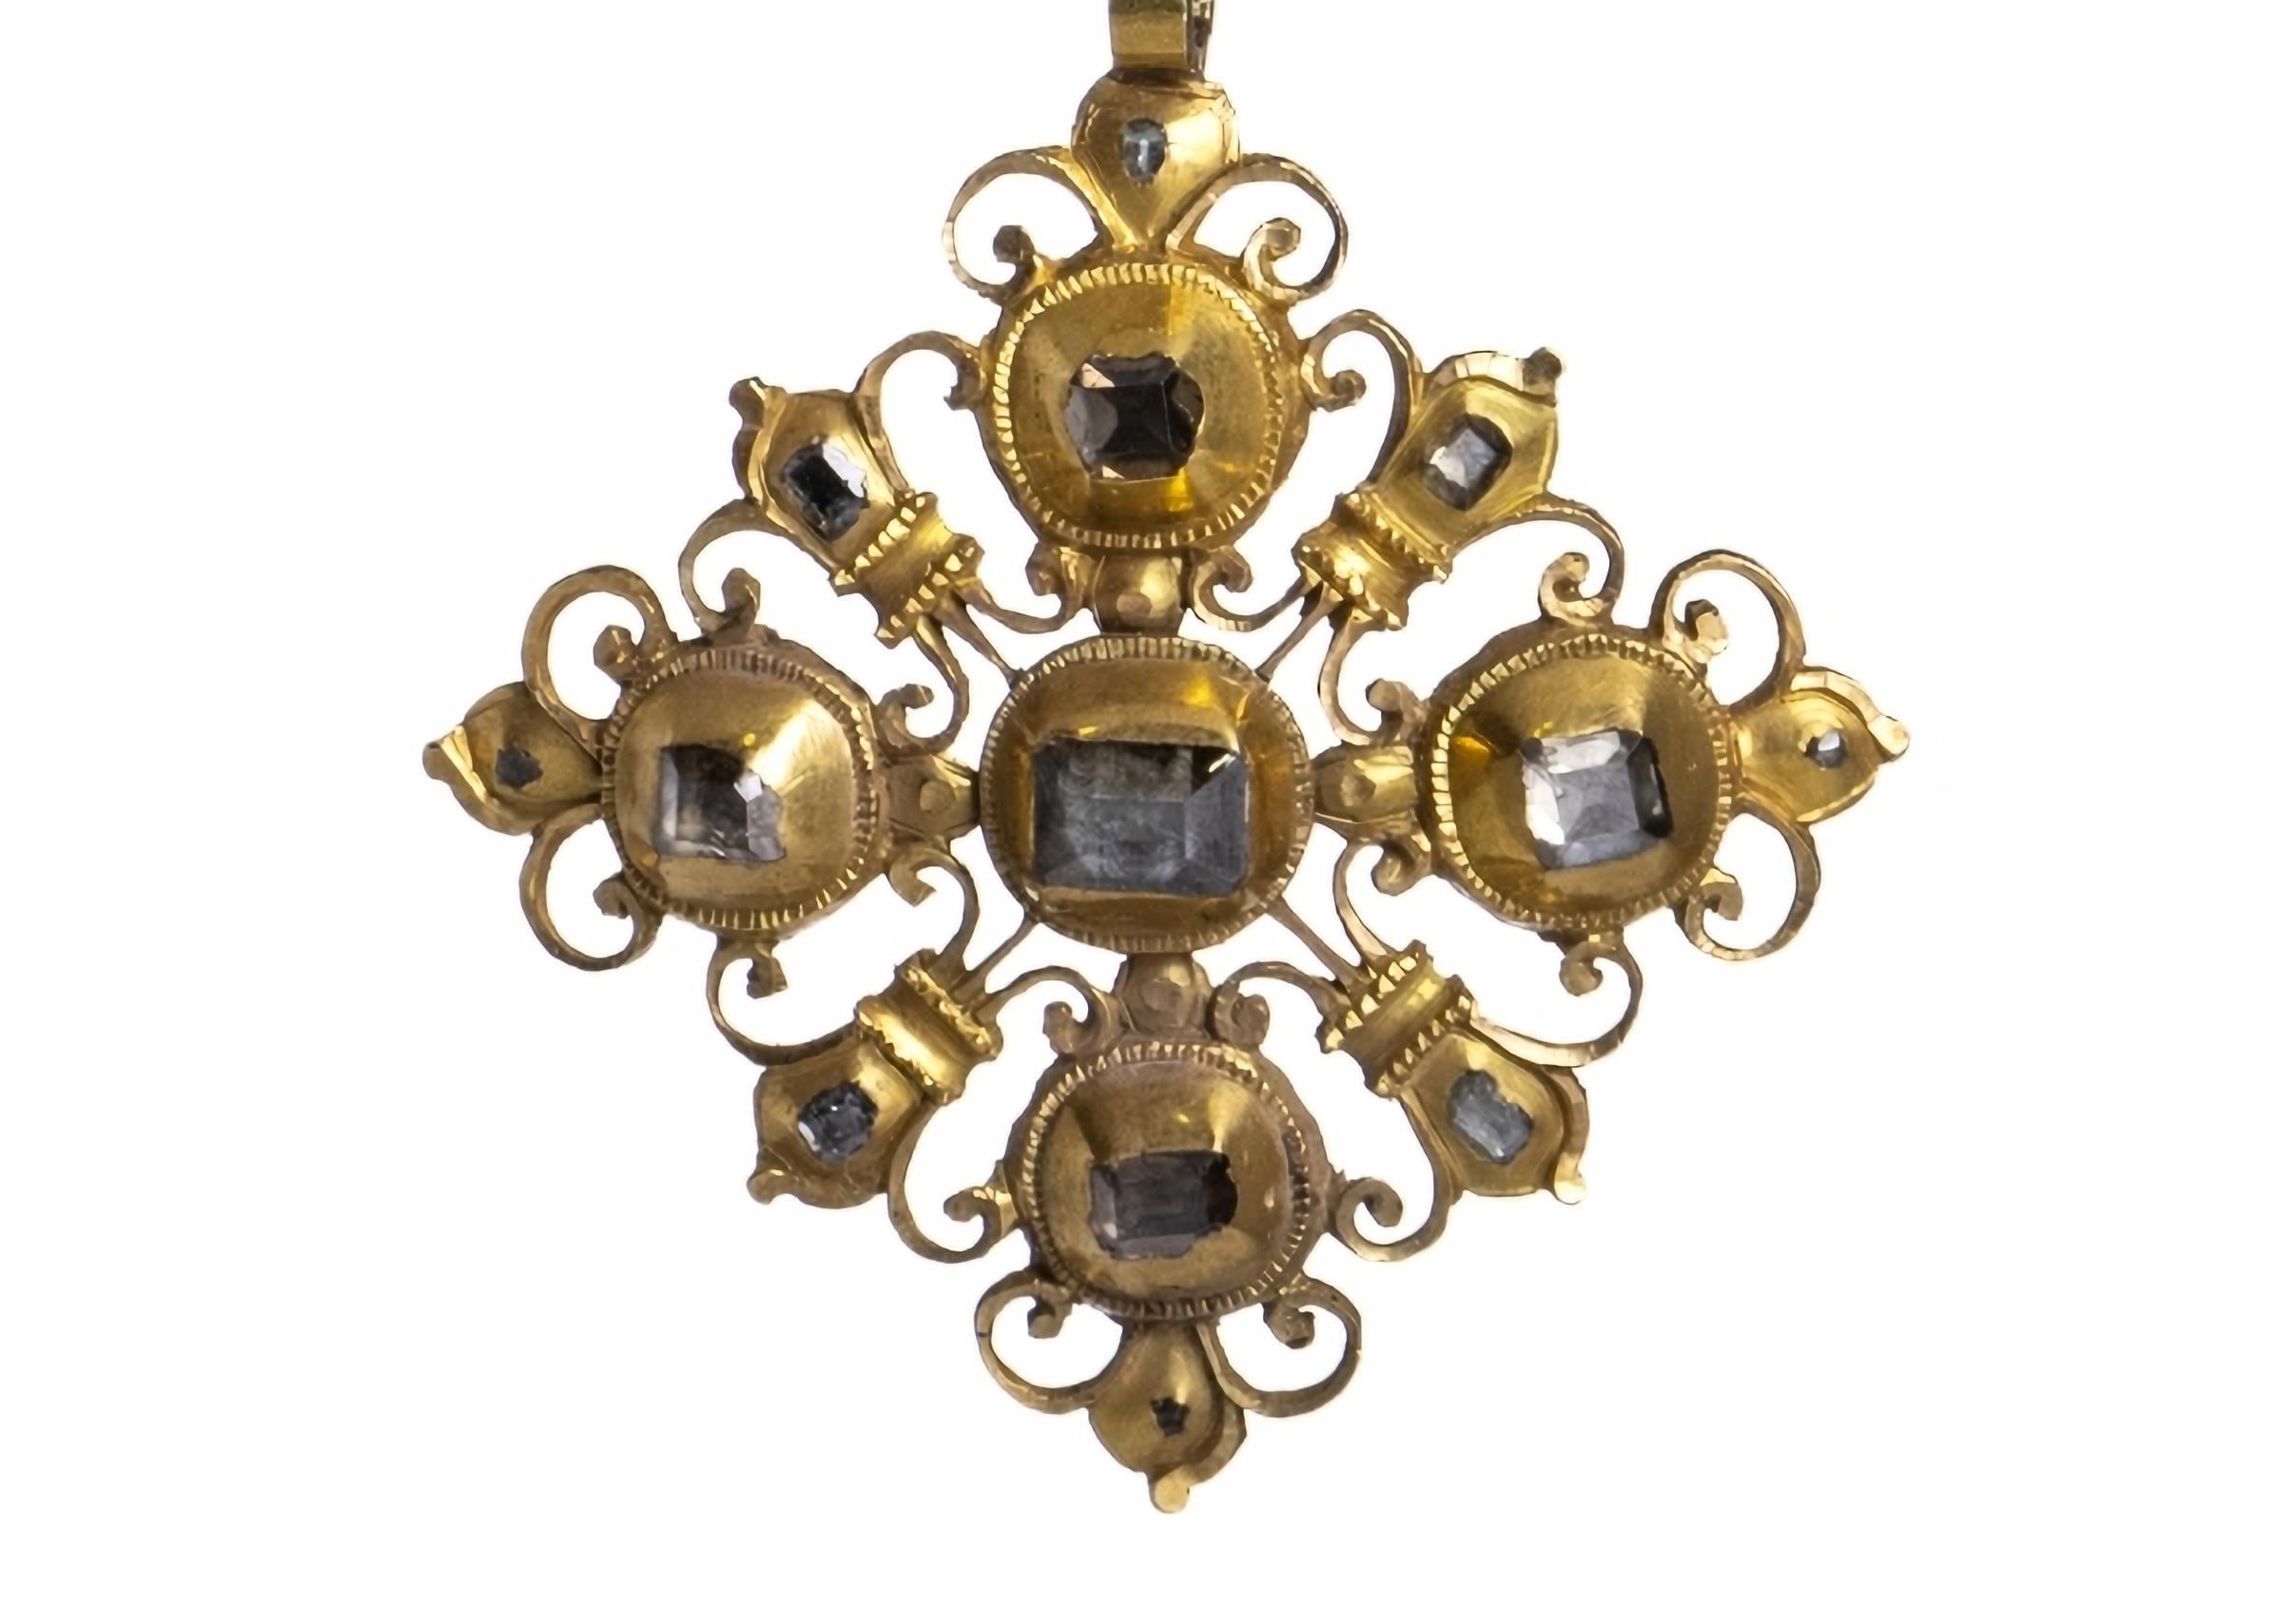 BODY TRIM IN GOLD WITH DIAMONDS
18th Century
in 19.2 kt gold, fenestrated and chiseled, with three articulated bodies, set with antique cut diamonds, set in alveoli. With 'GS' goldsmith contrast. Signs of use, with a posteriori pin application, on